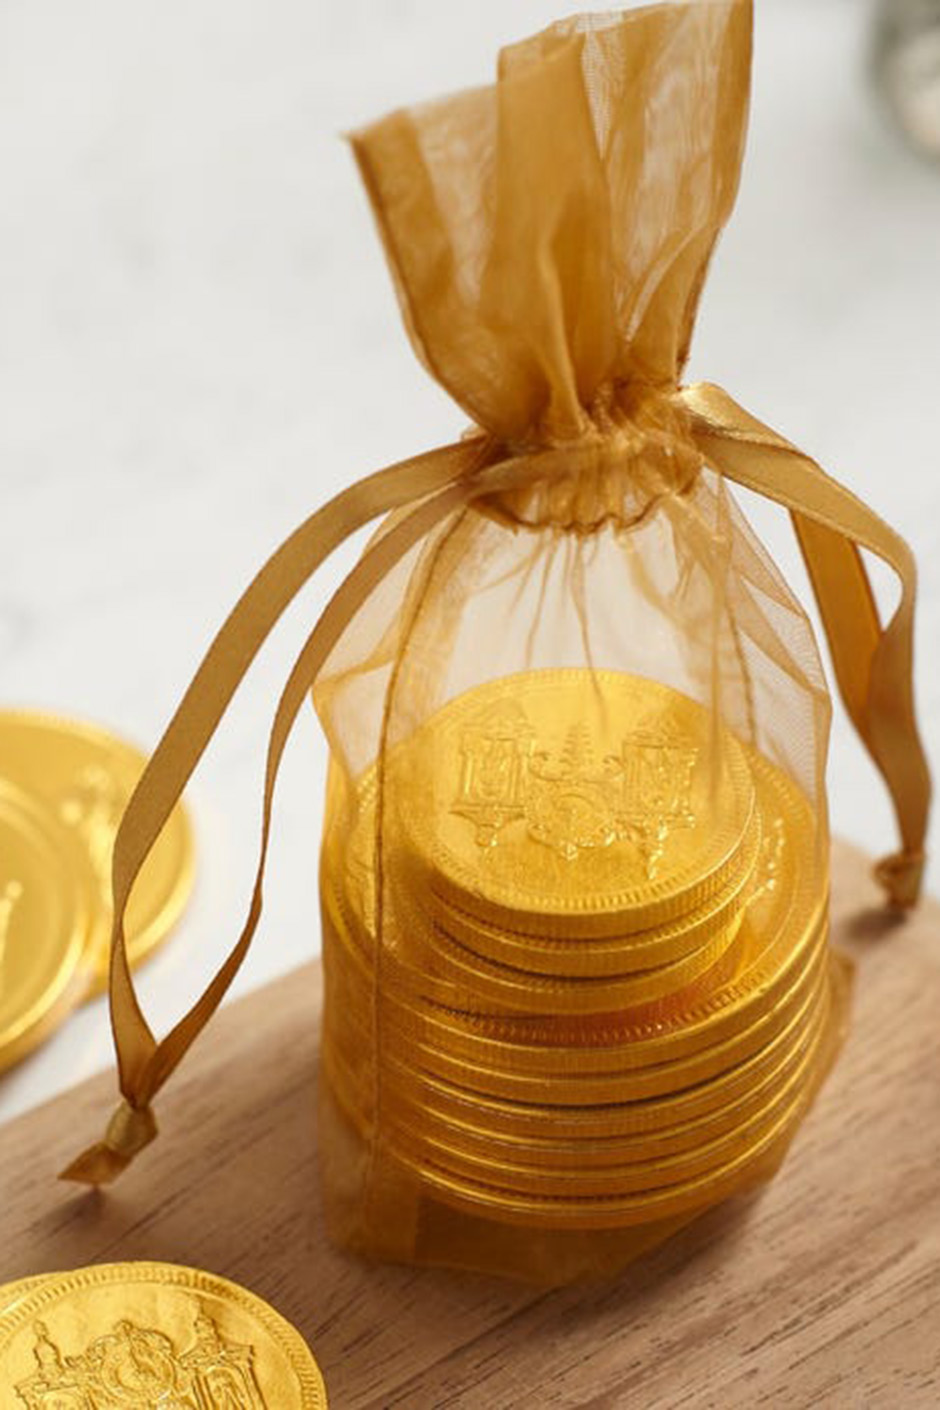 chocolate-gold-coins-fortnum-and-mason.jpg